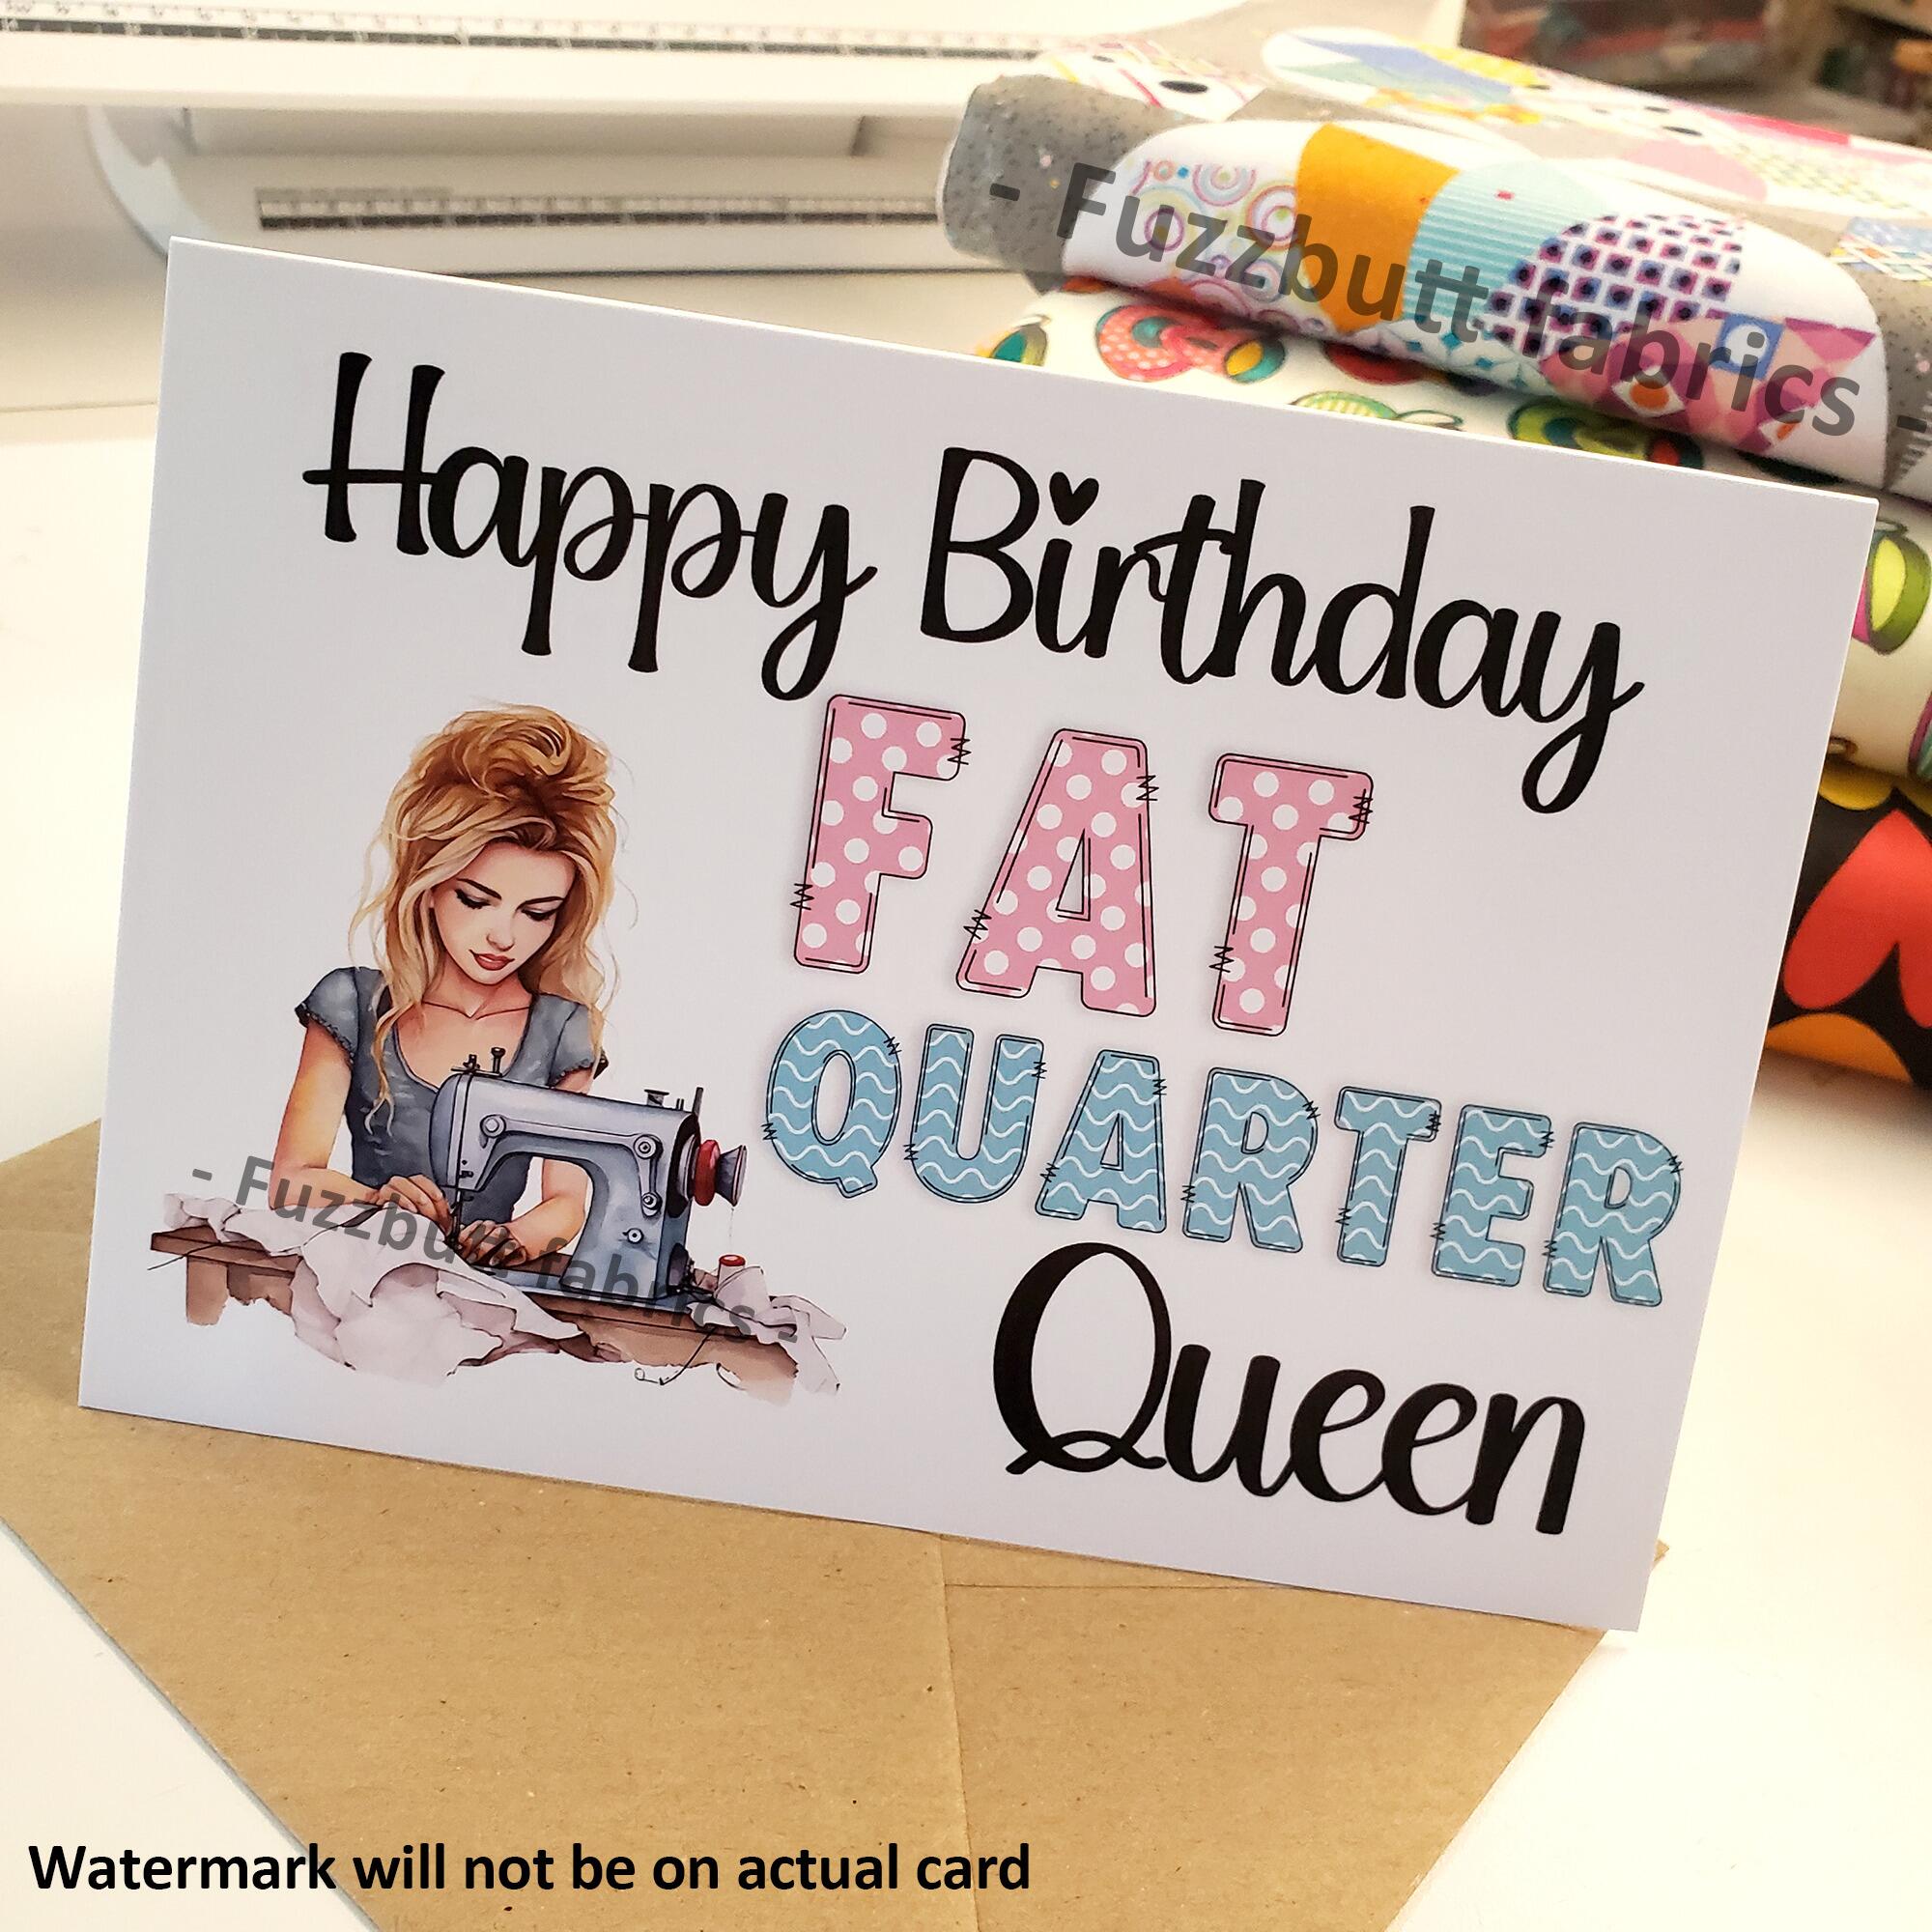 quilting themed birthday card, quilting card, greetings card, uk sewing birthday cards, sewing themed card, quilting themed card